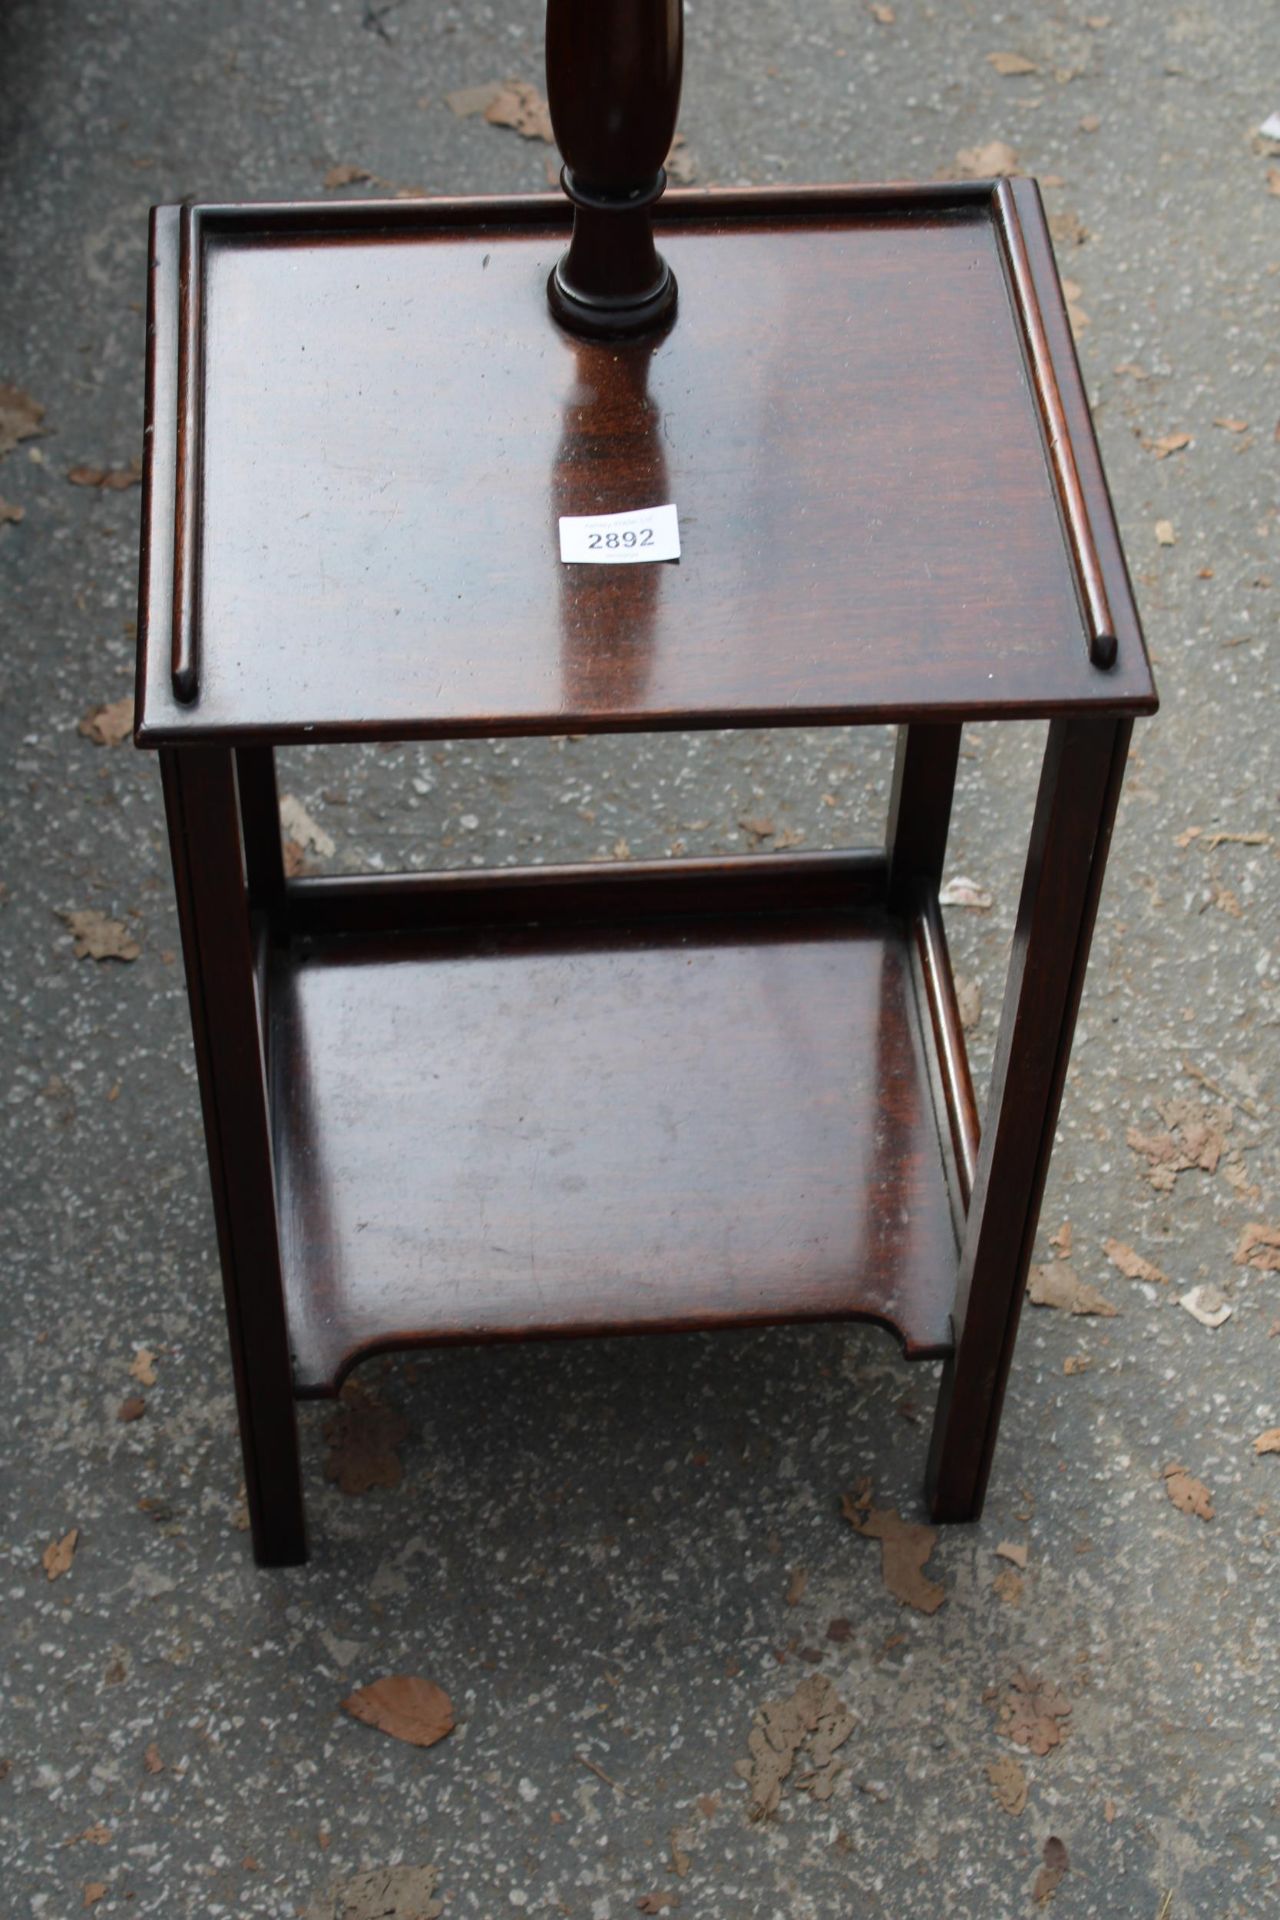 AN EARLY 20TH CENTURY MAHOGANY TWO TIER STANDARD LAMP TABLE WITH TURNED COLUMN - Image 2 of 2